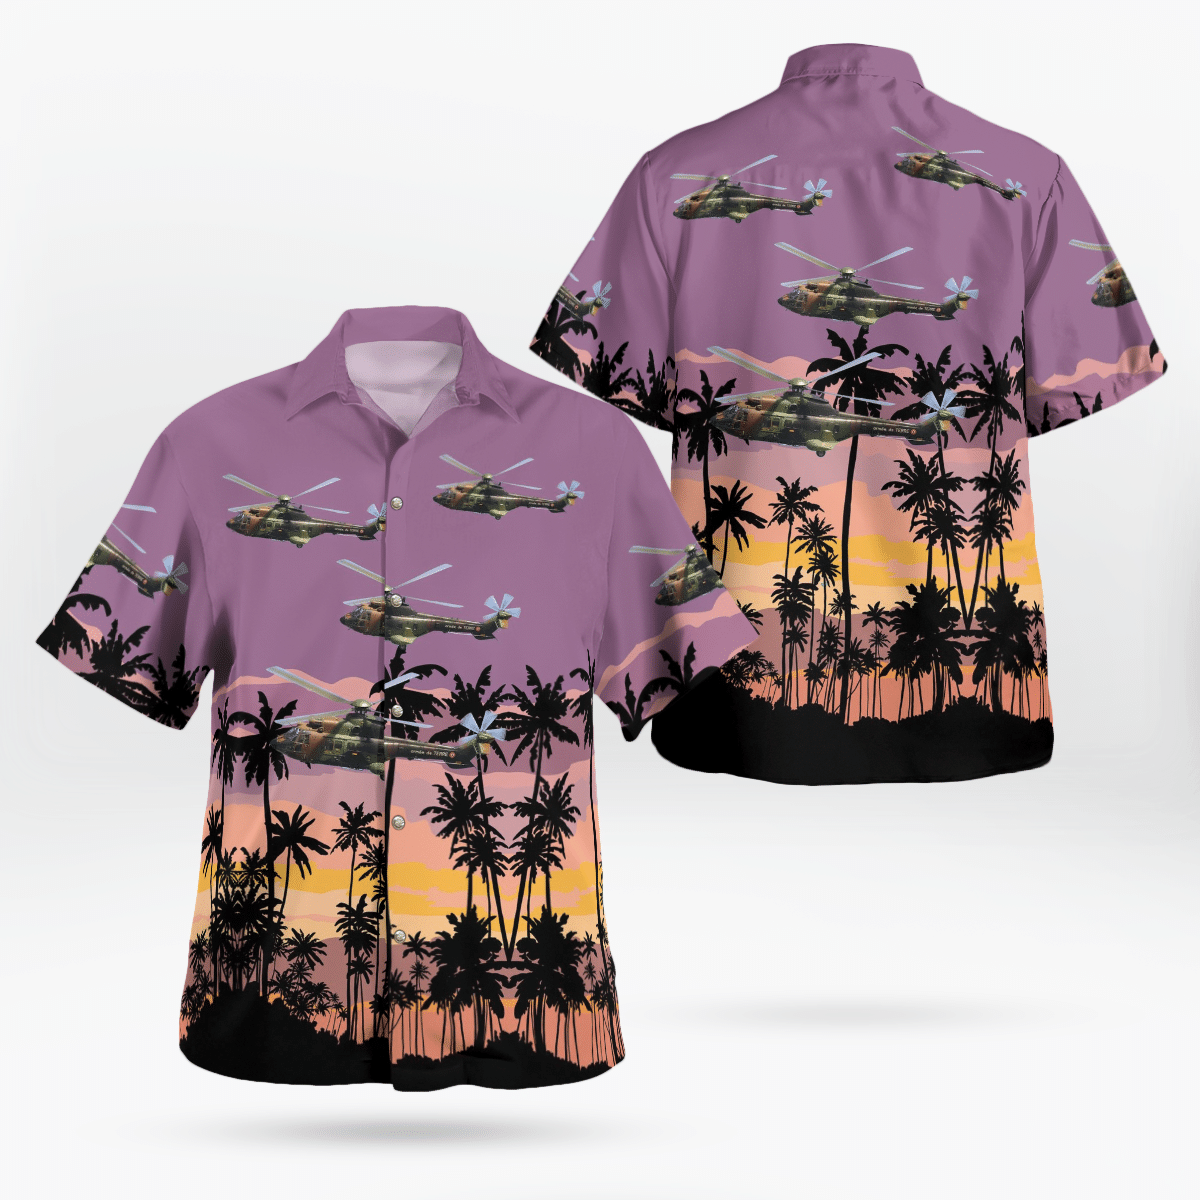 Consider getting these Hawaiian Shirt for your friends 97